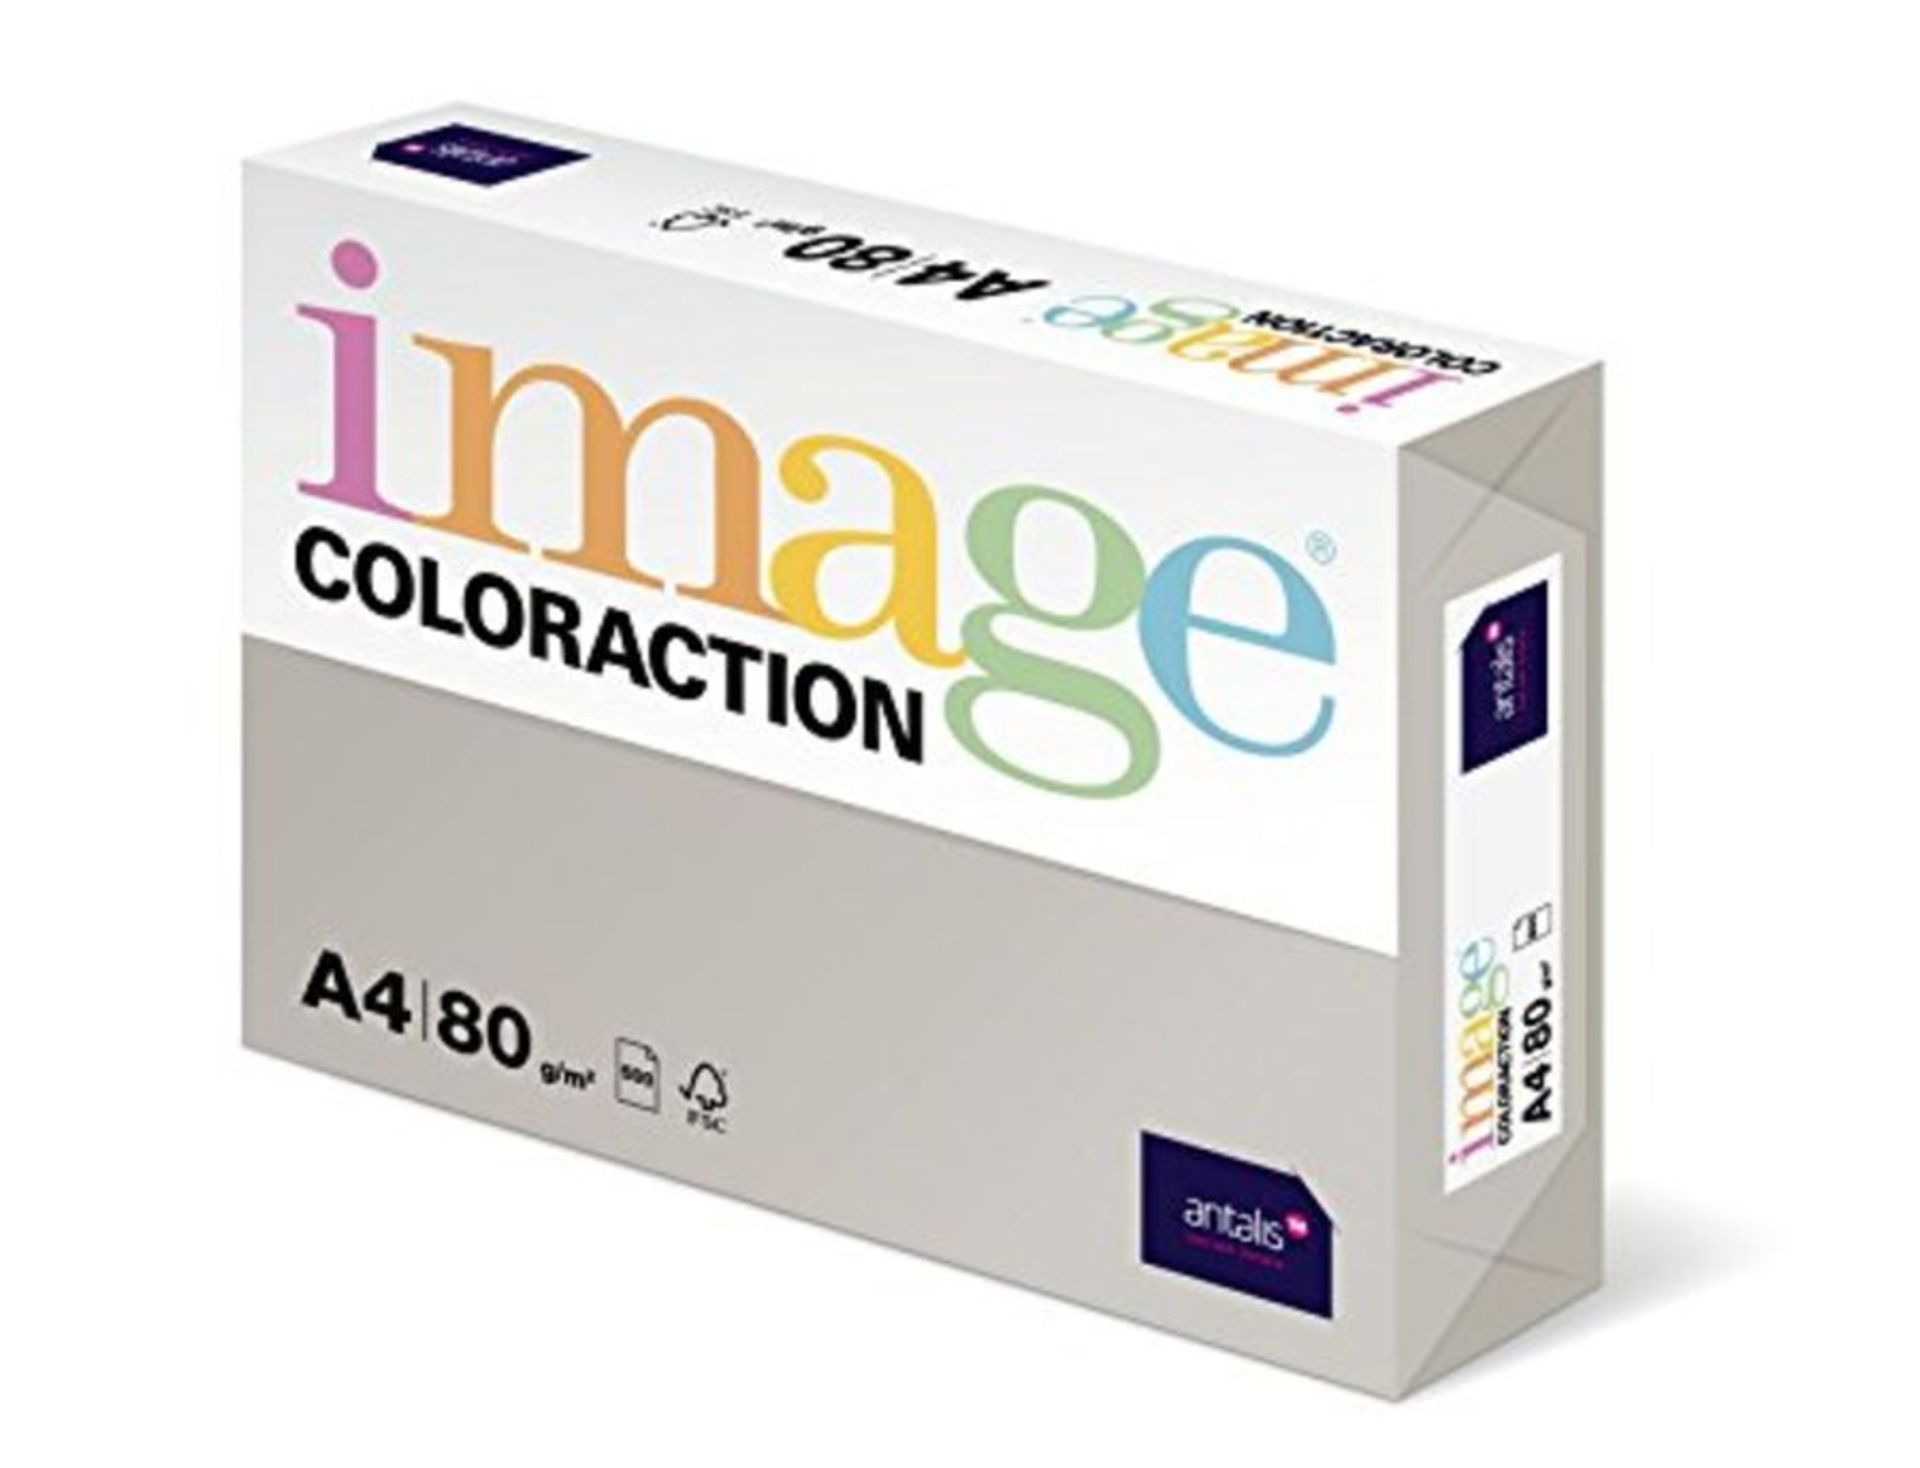 Coloraction Pale Grey (Iceland) A4 Colour Paper 80 GSM (Pack of 500 Sheets)